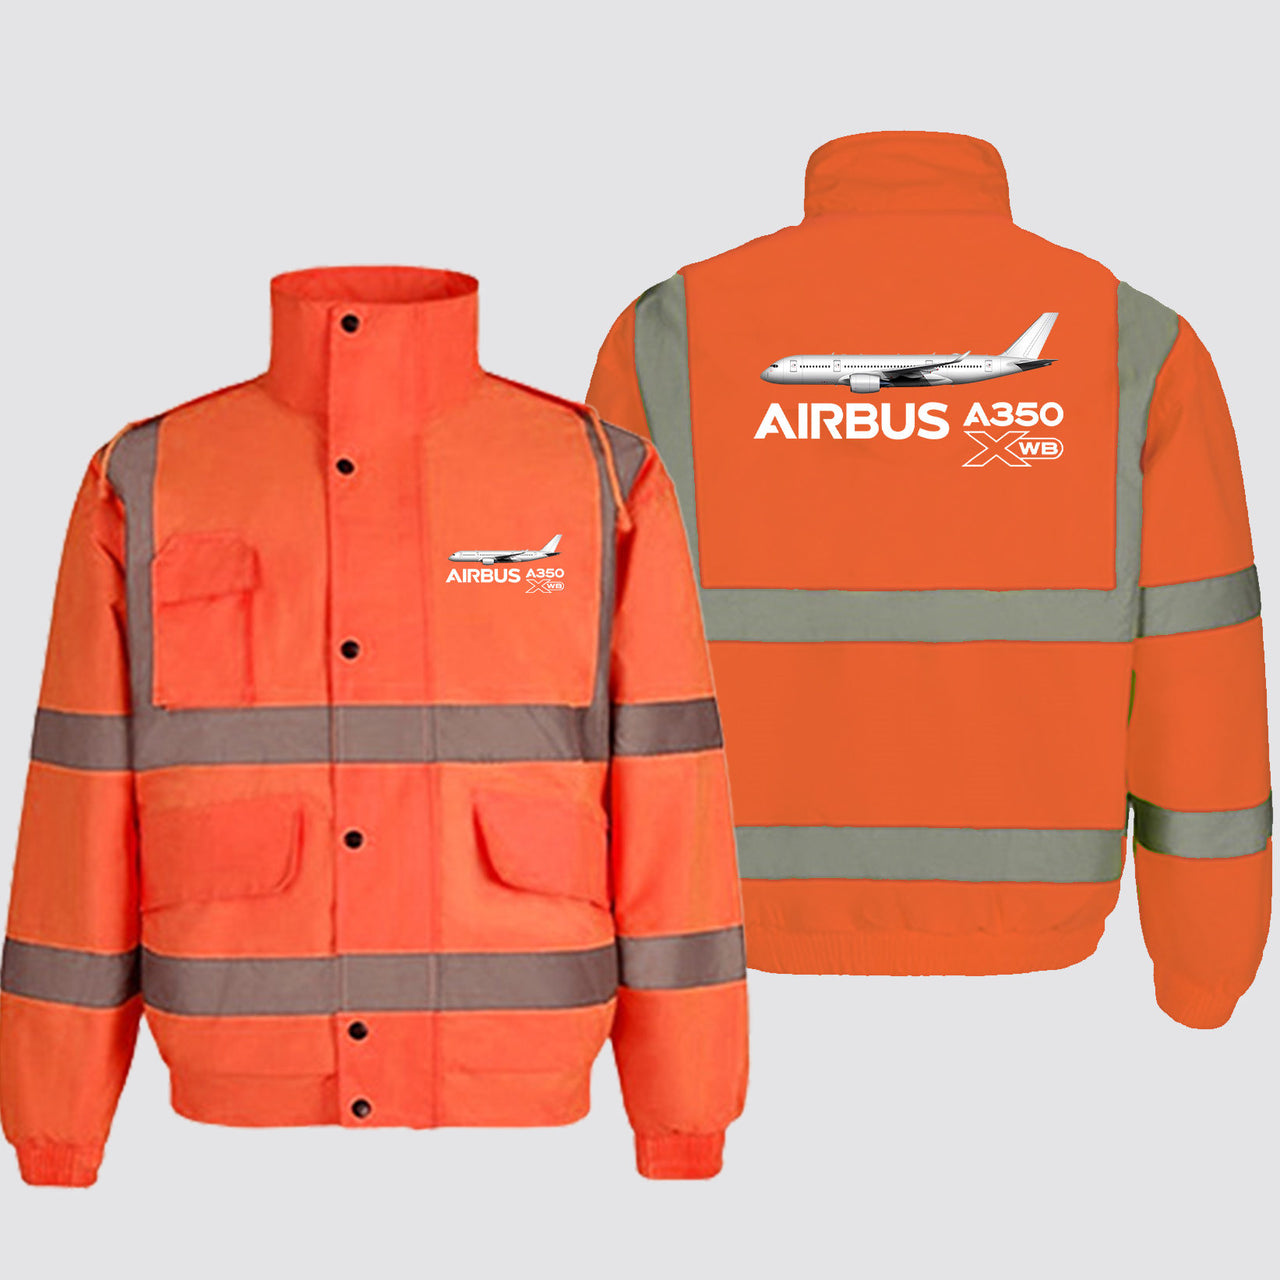 The Airbus A350 WXB Designed Reflective Winter Jackets